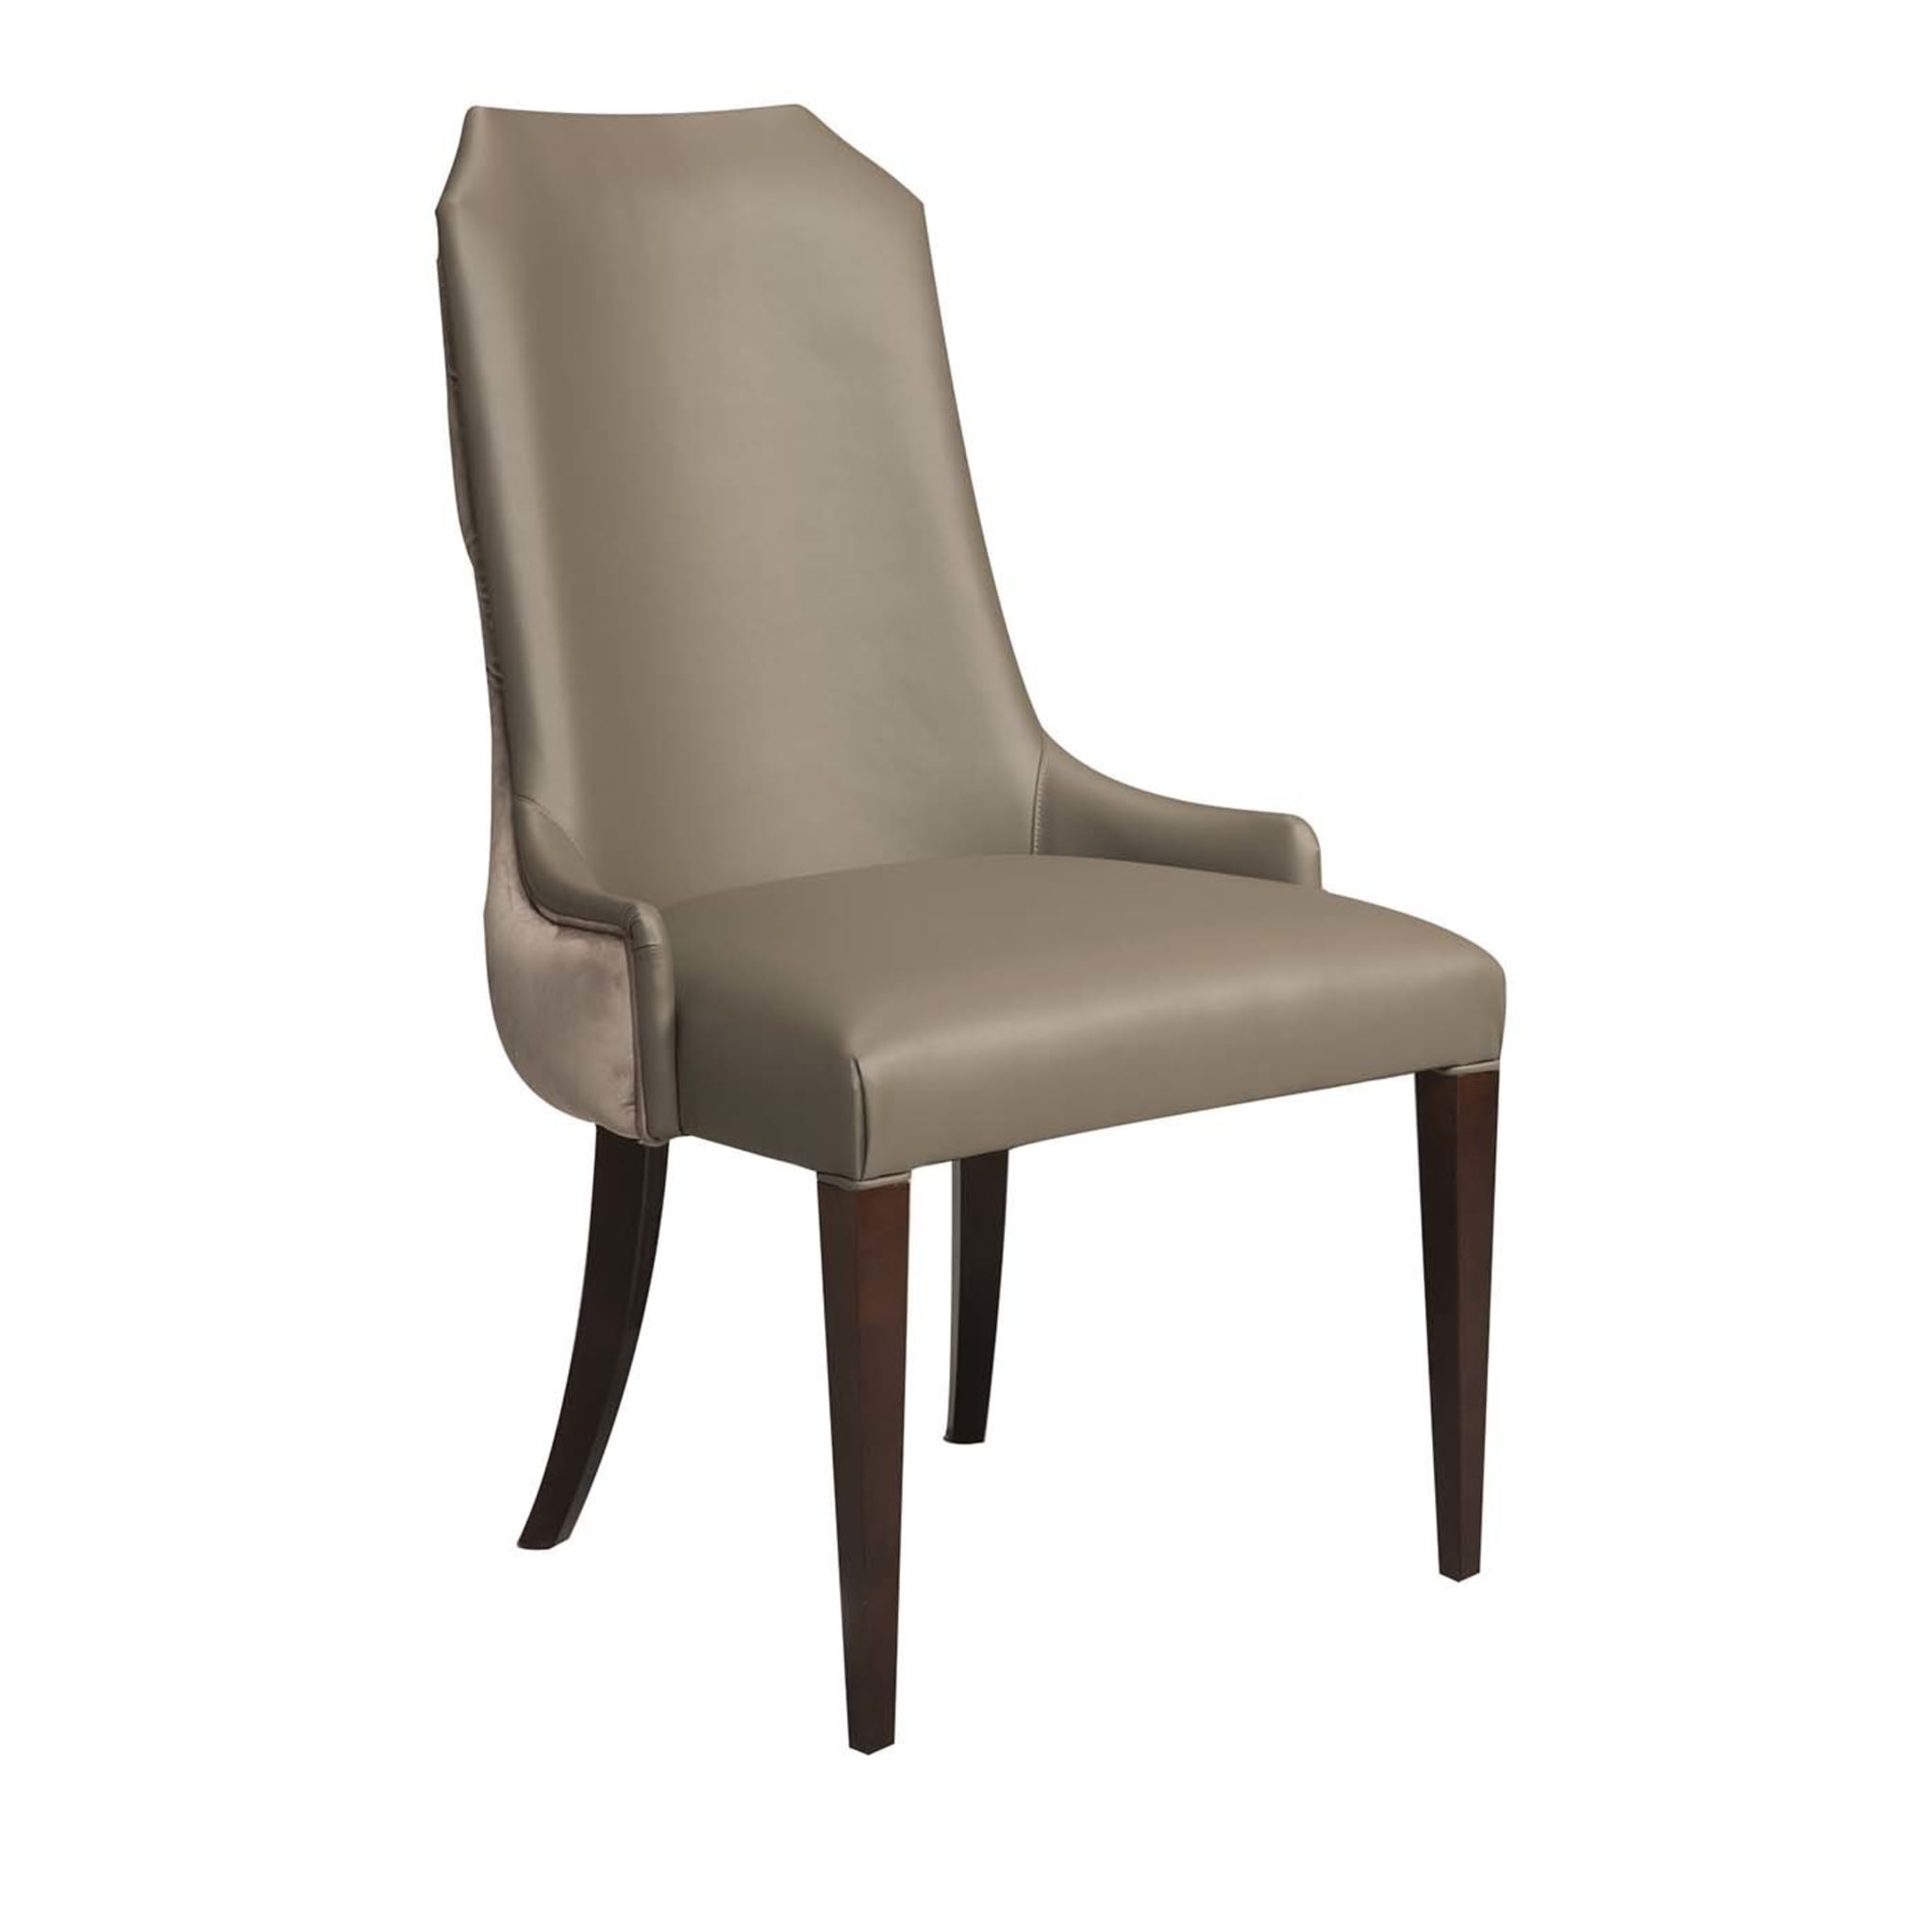 Oscar Tufted Upholstered Chair - Main view